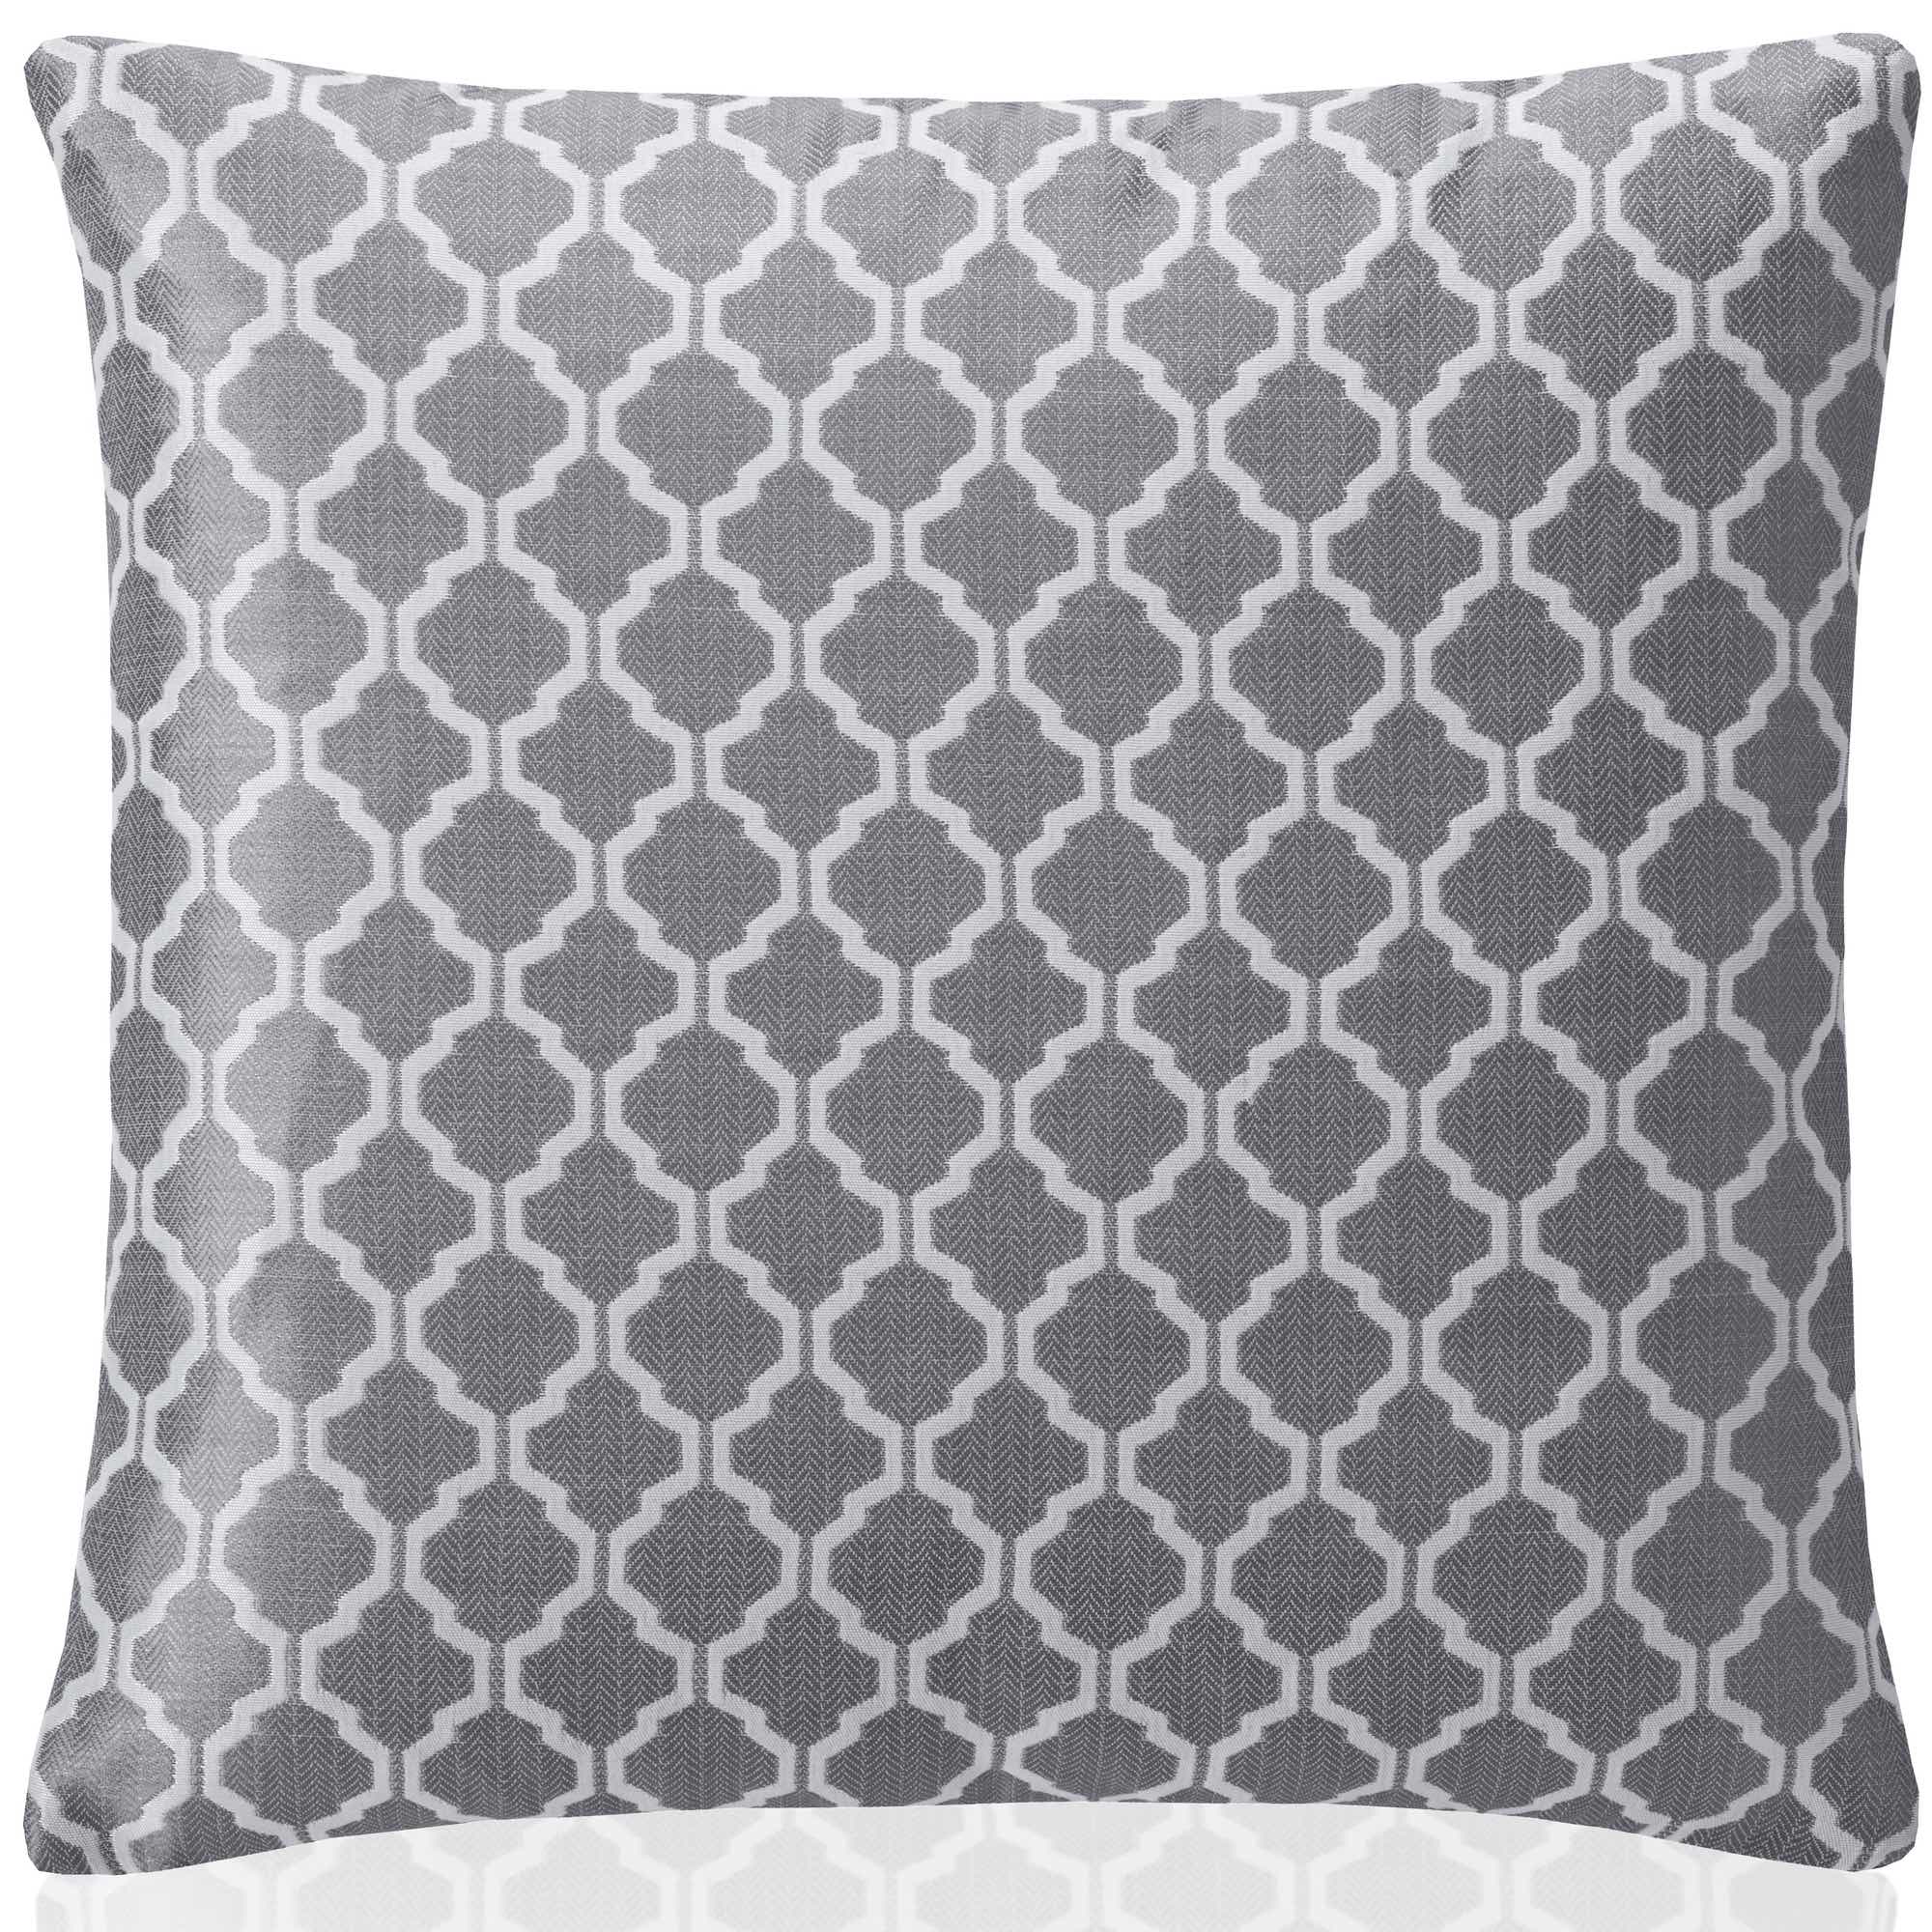 Cotswold Jacquard Cushion Cover - Silver-Williamsons Factory Shop